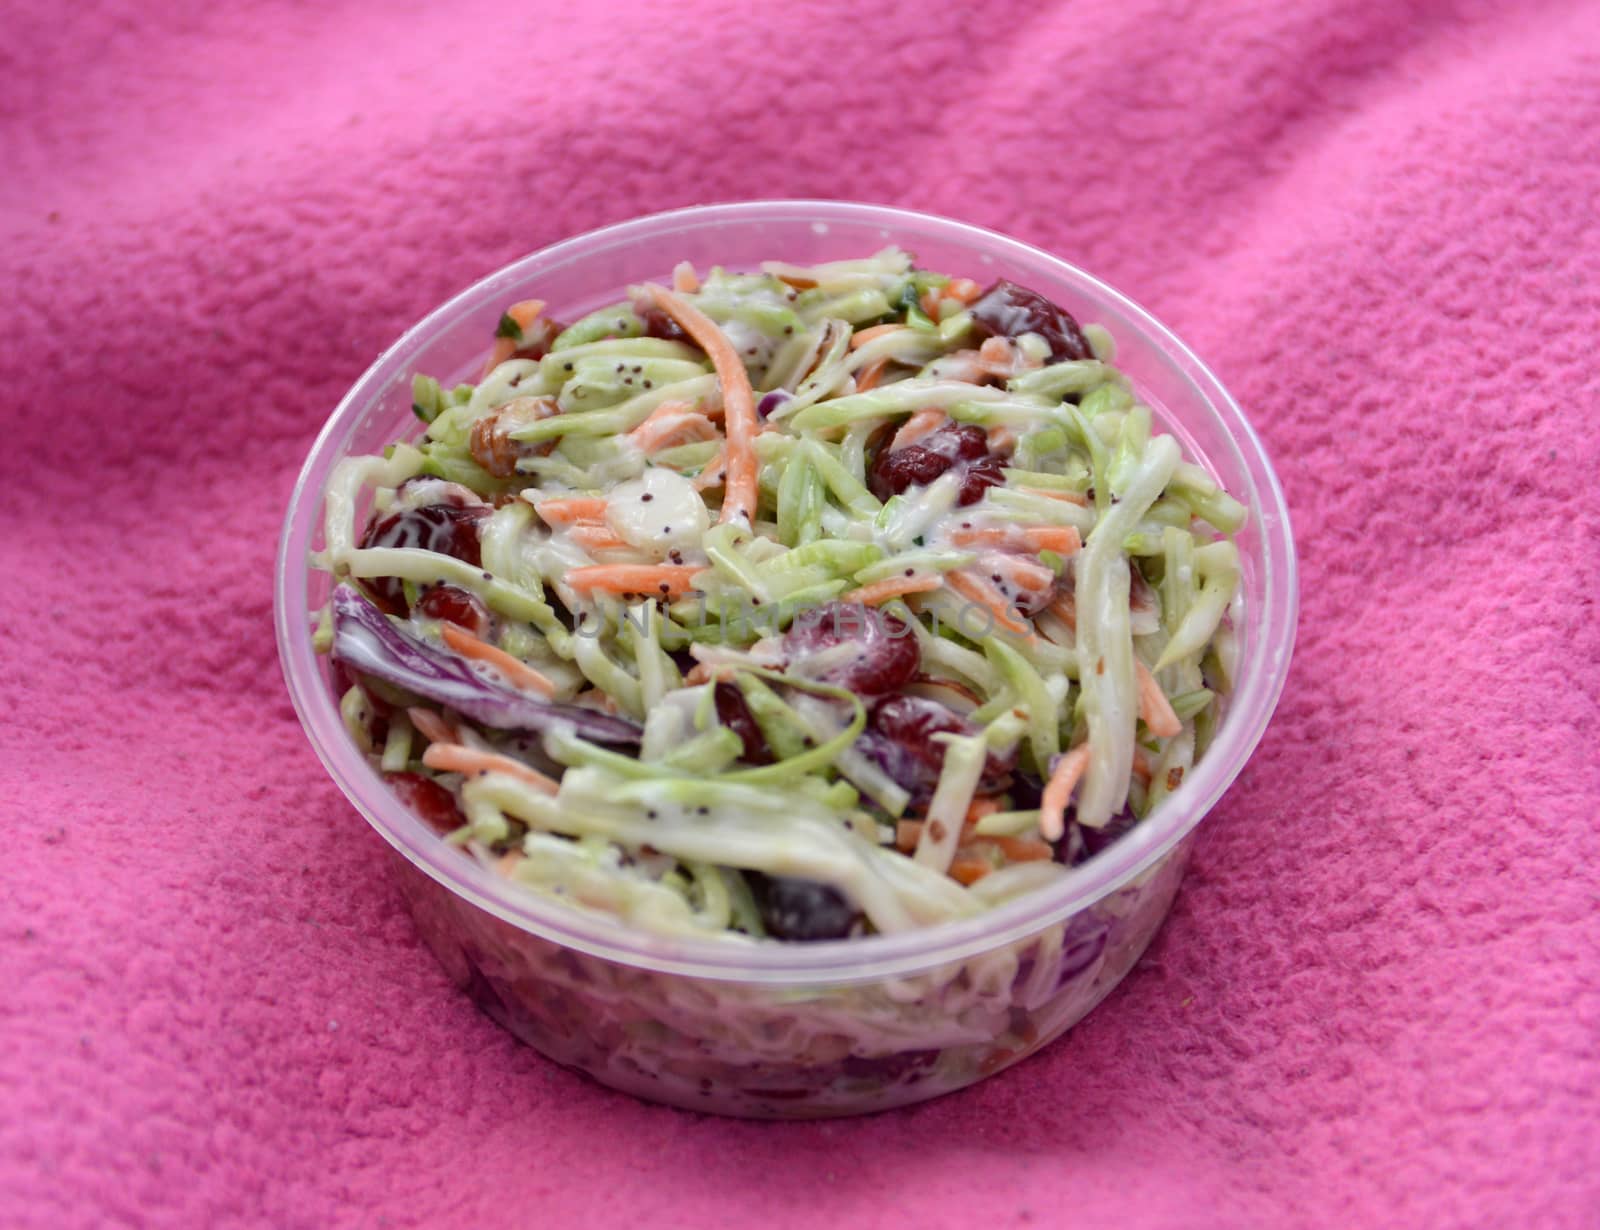 coleslaw in a to-go container with cranberries